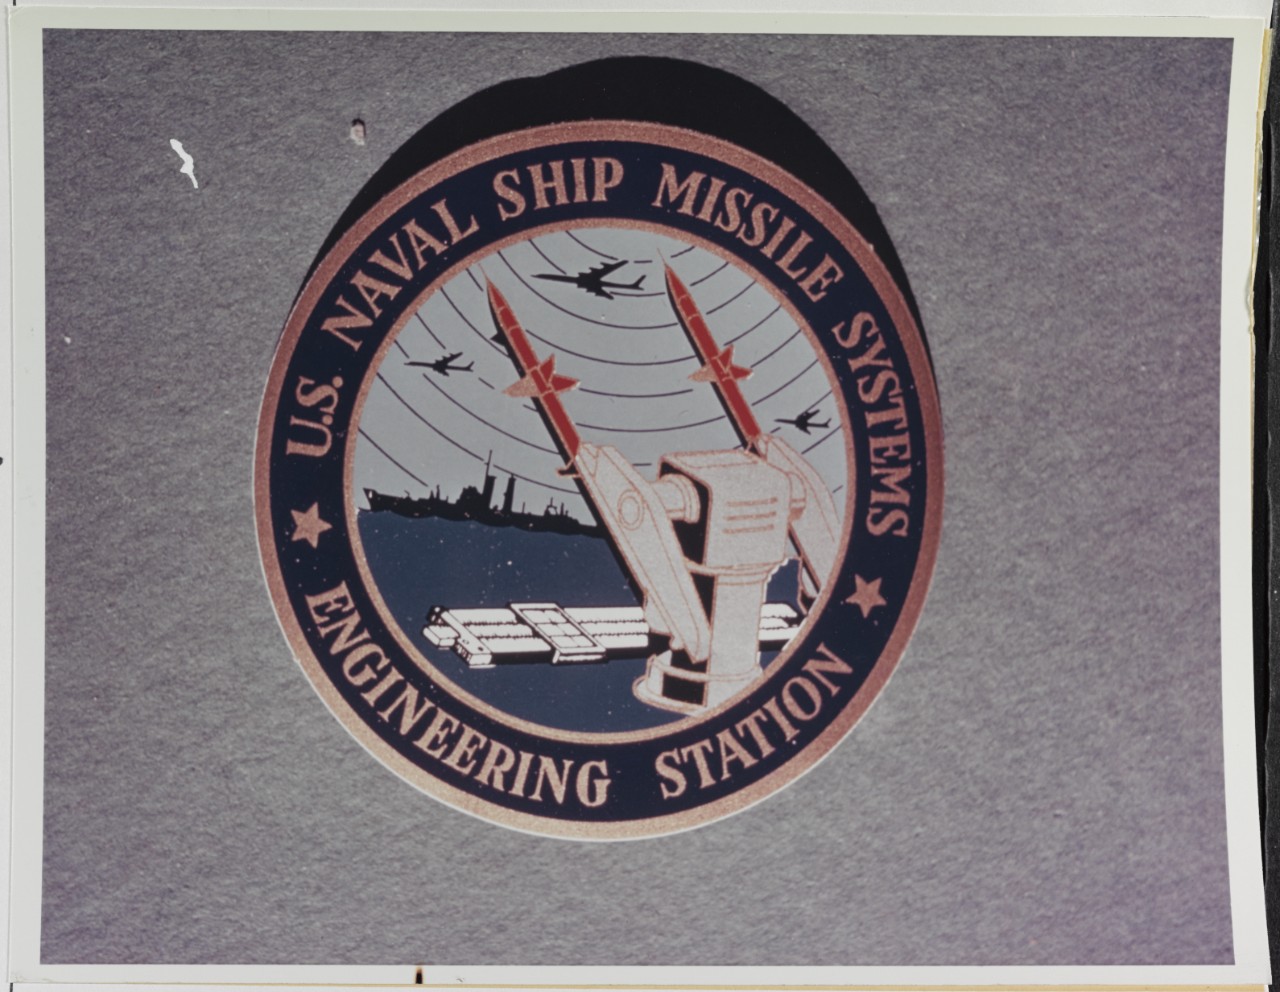 Insignia:  U.S. Naval Ship Missile Systems Engineering Station